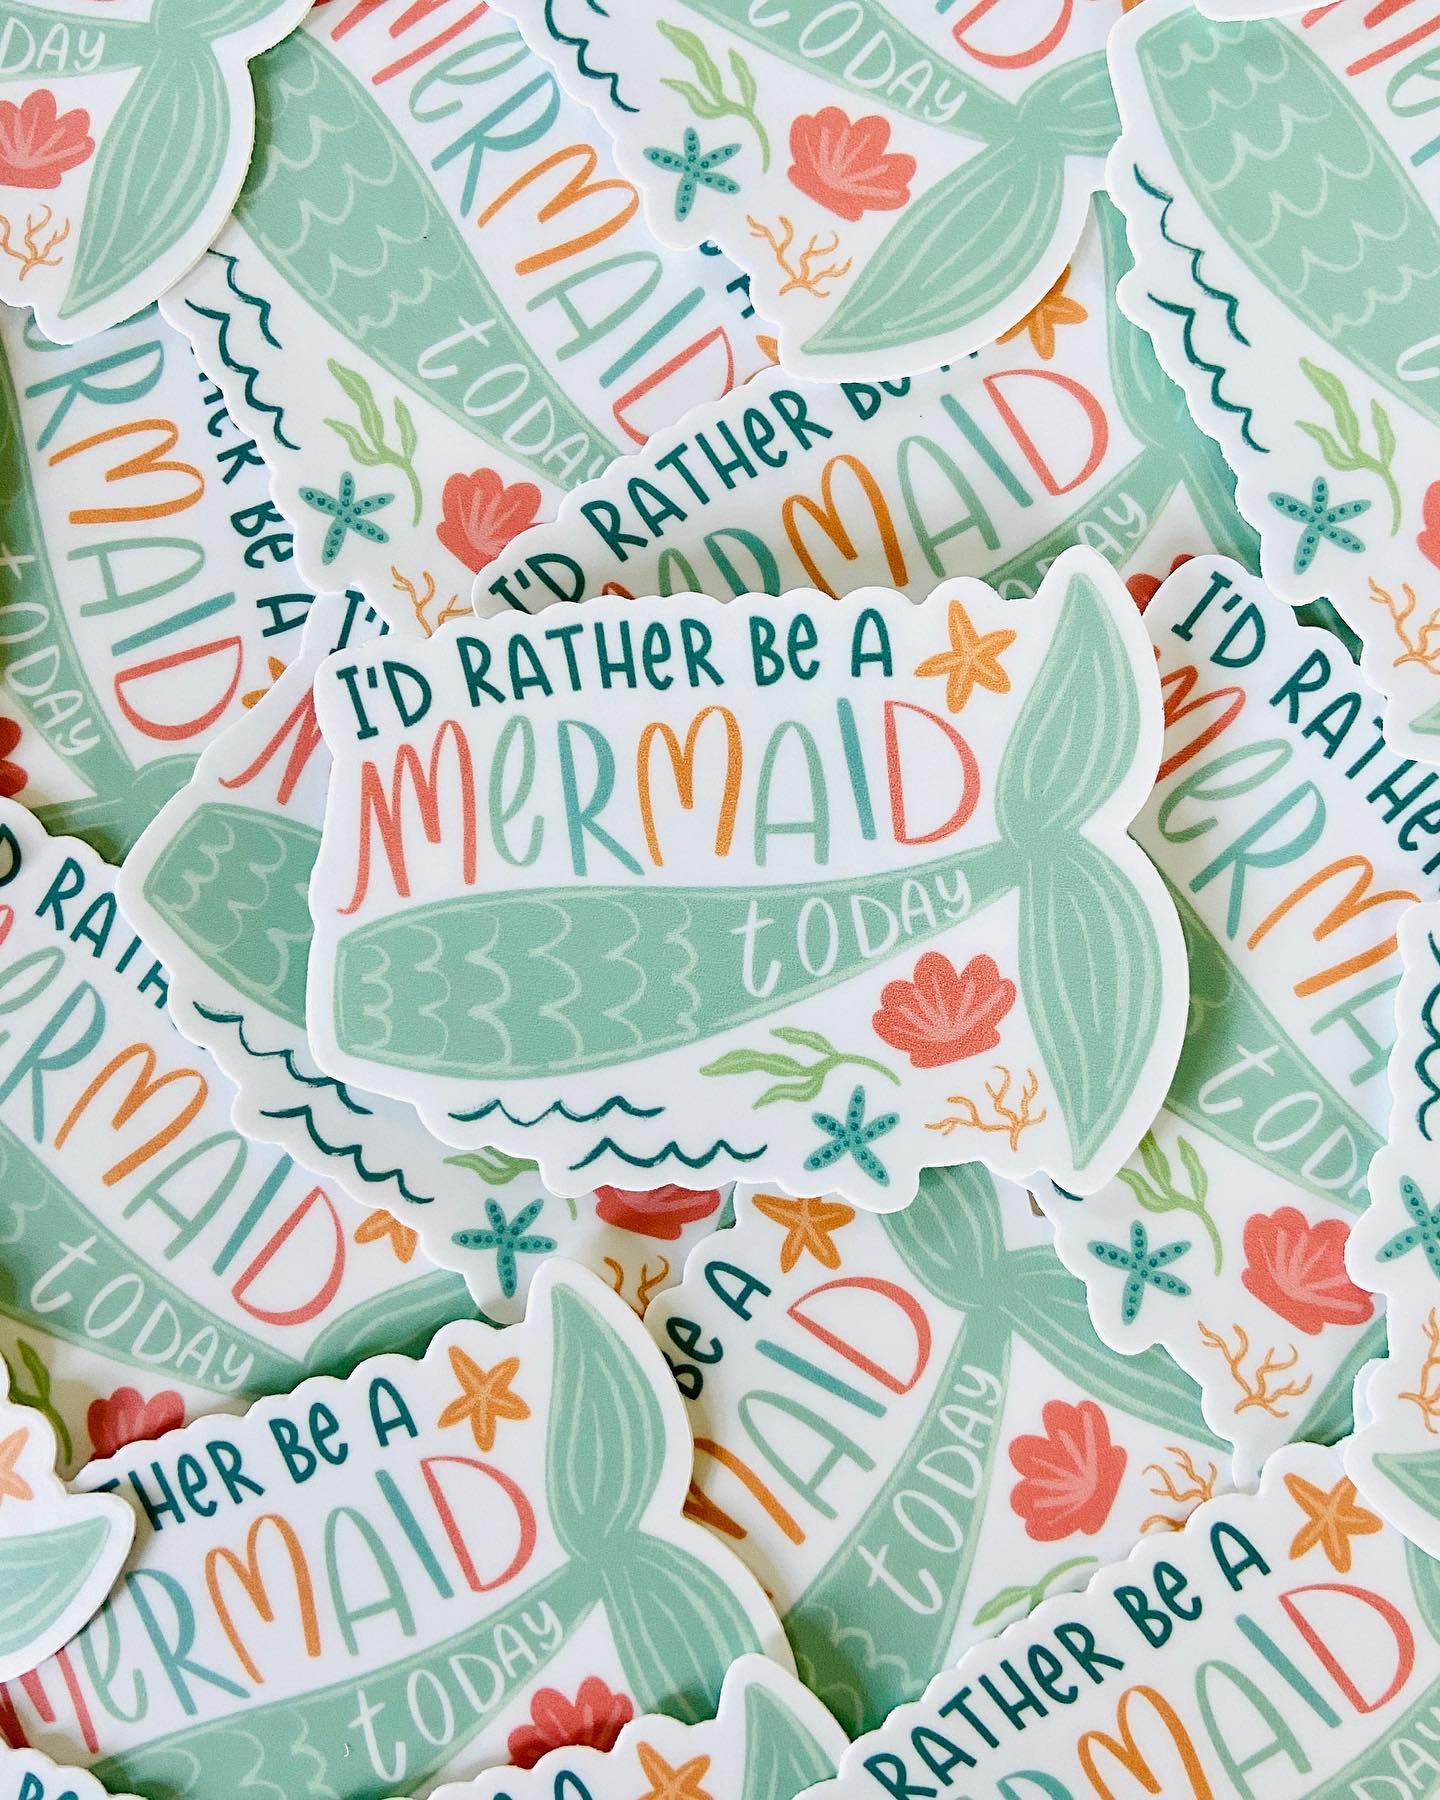 Tonight is the night! 🧜🏼&zwj;♀️🎉 Mermaid&rsquo;s Night Out  @okaquarium starts at 6:30! Come see all the 🐠🐟🐠🐟, explore the 🦈 tank, and shop! I will be there set up with new stickers, stationary, gifts and more! Hope to see ya there! 

#mermai